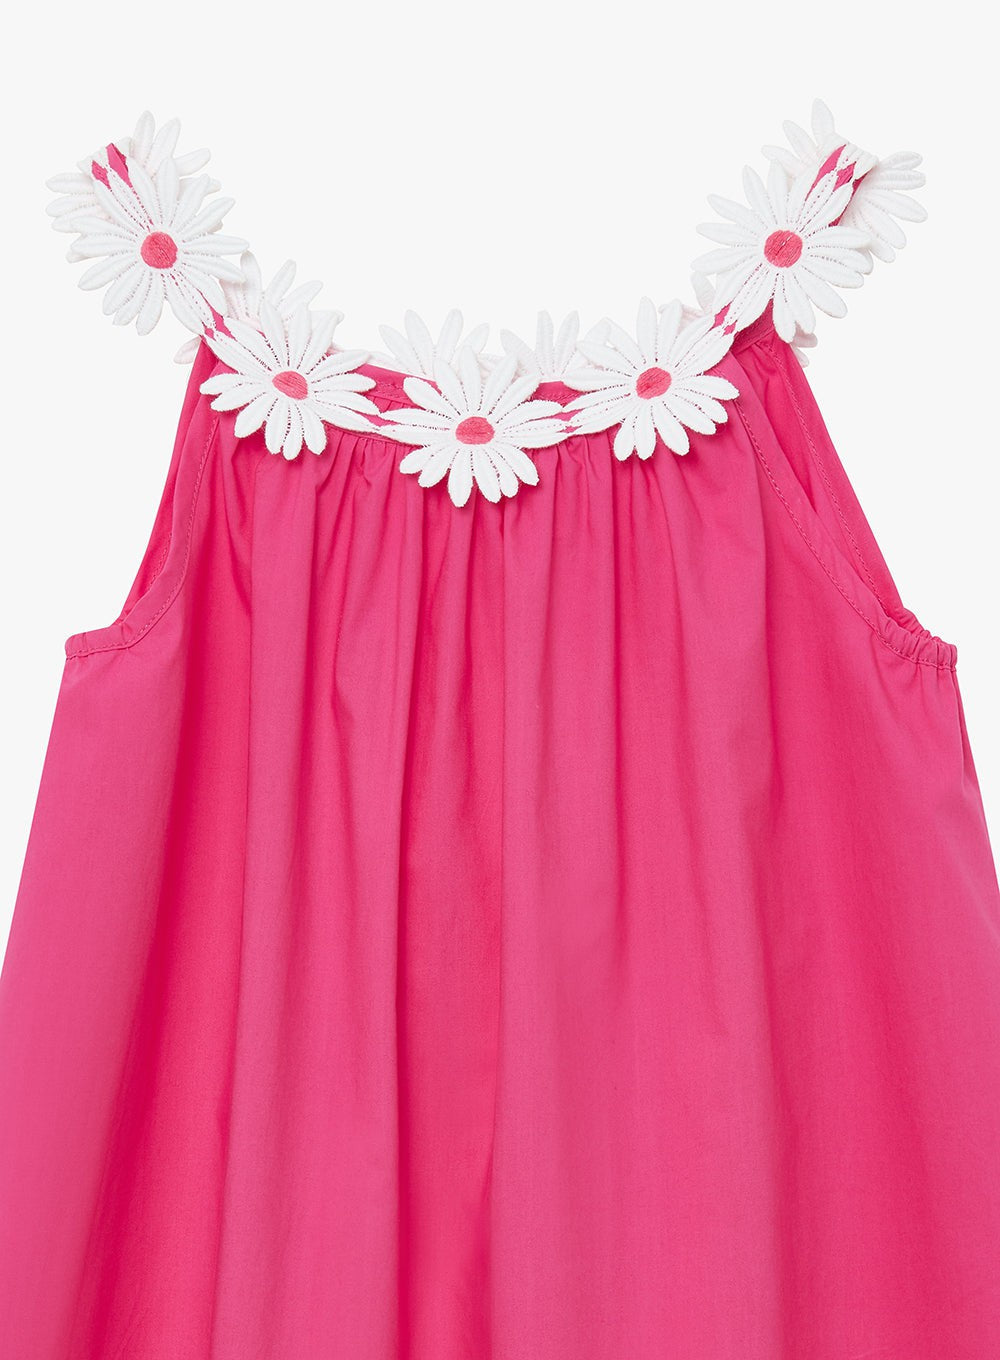 Confiture Dress Broderie Daisy Dress in Bright Pink